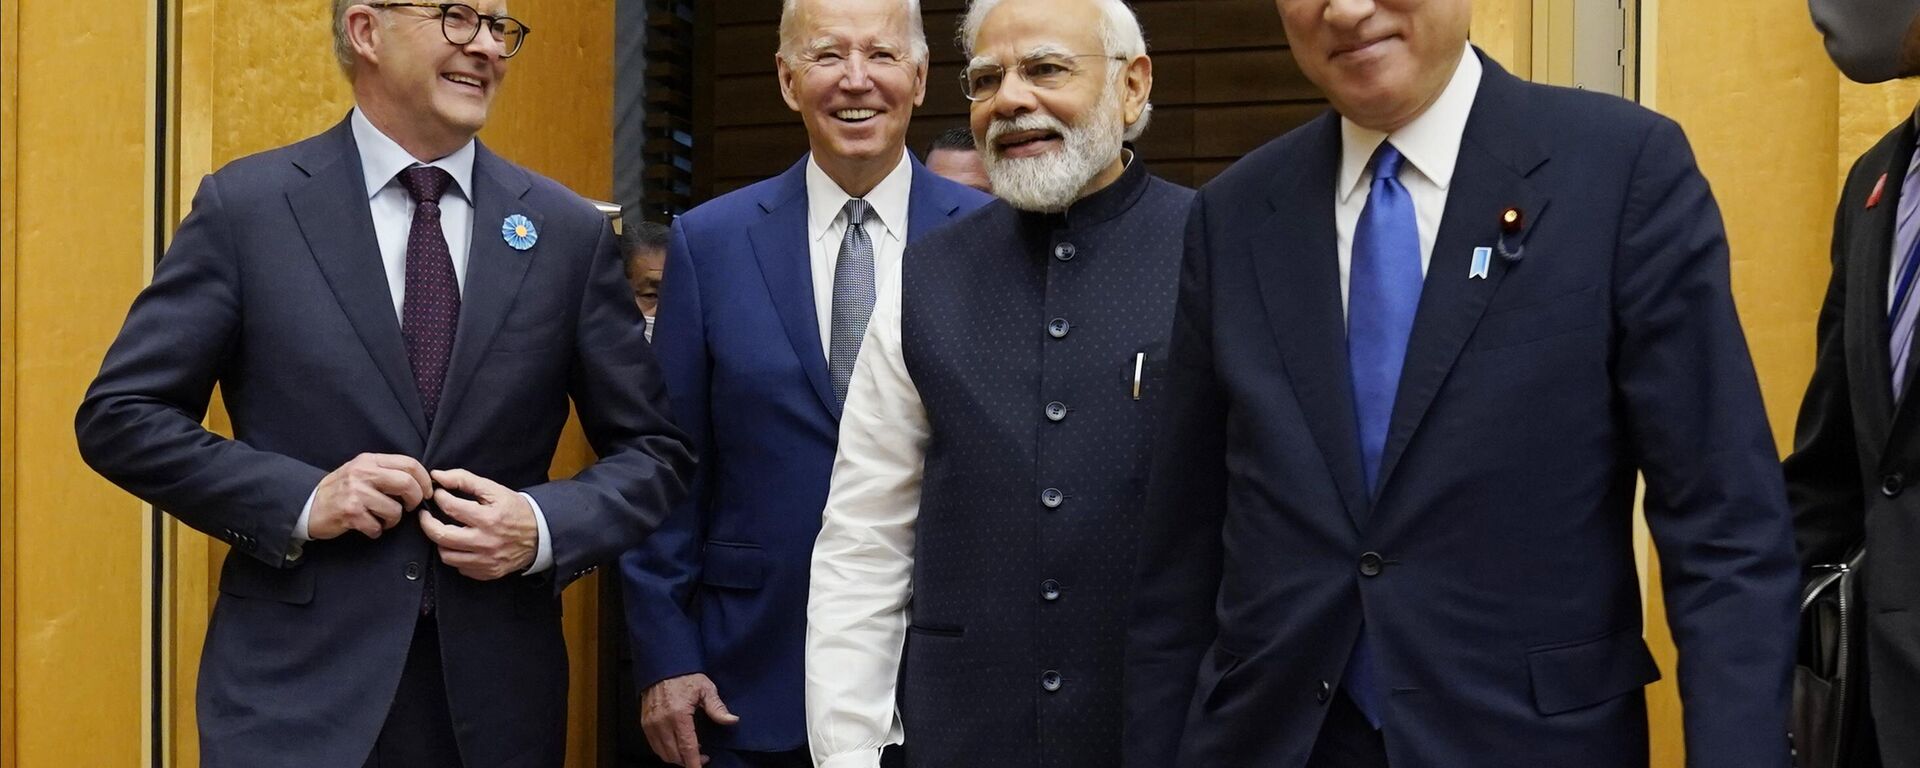 Australian Prime Minister Anthony Albanese, left, U.S. President Joe Biden, Indian Prime Minister Narendra Modi are greeted by Japanese Prime Minister Fumio Kishida, right, during his arrival to the Quad leaders summit at the prime minister's official residence, Tuesday, May 24, 2022, in Tokyo. - Sputnik India, 1920, 08.02.2023